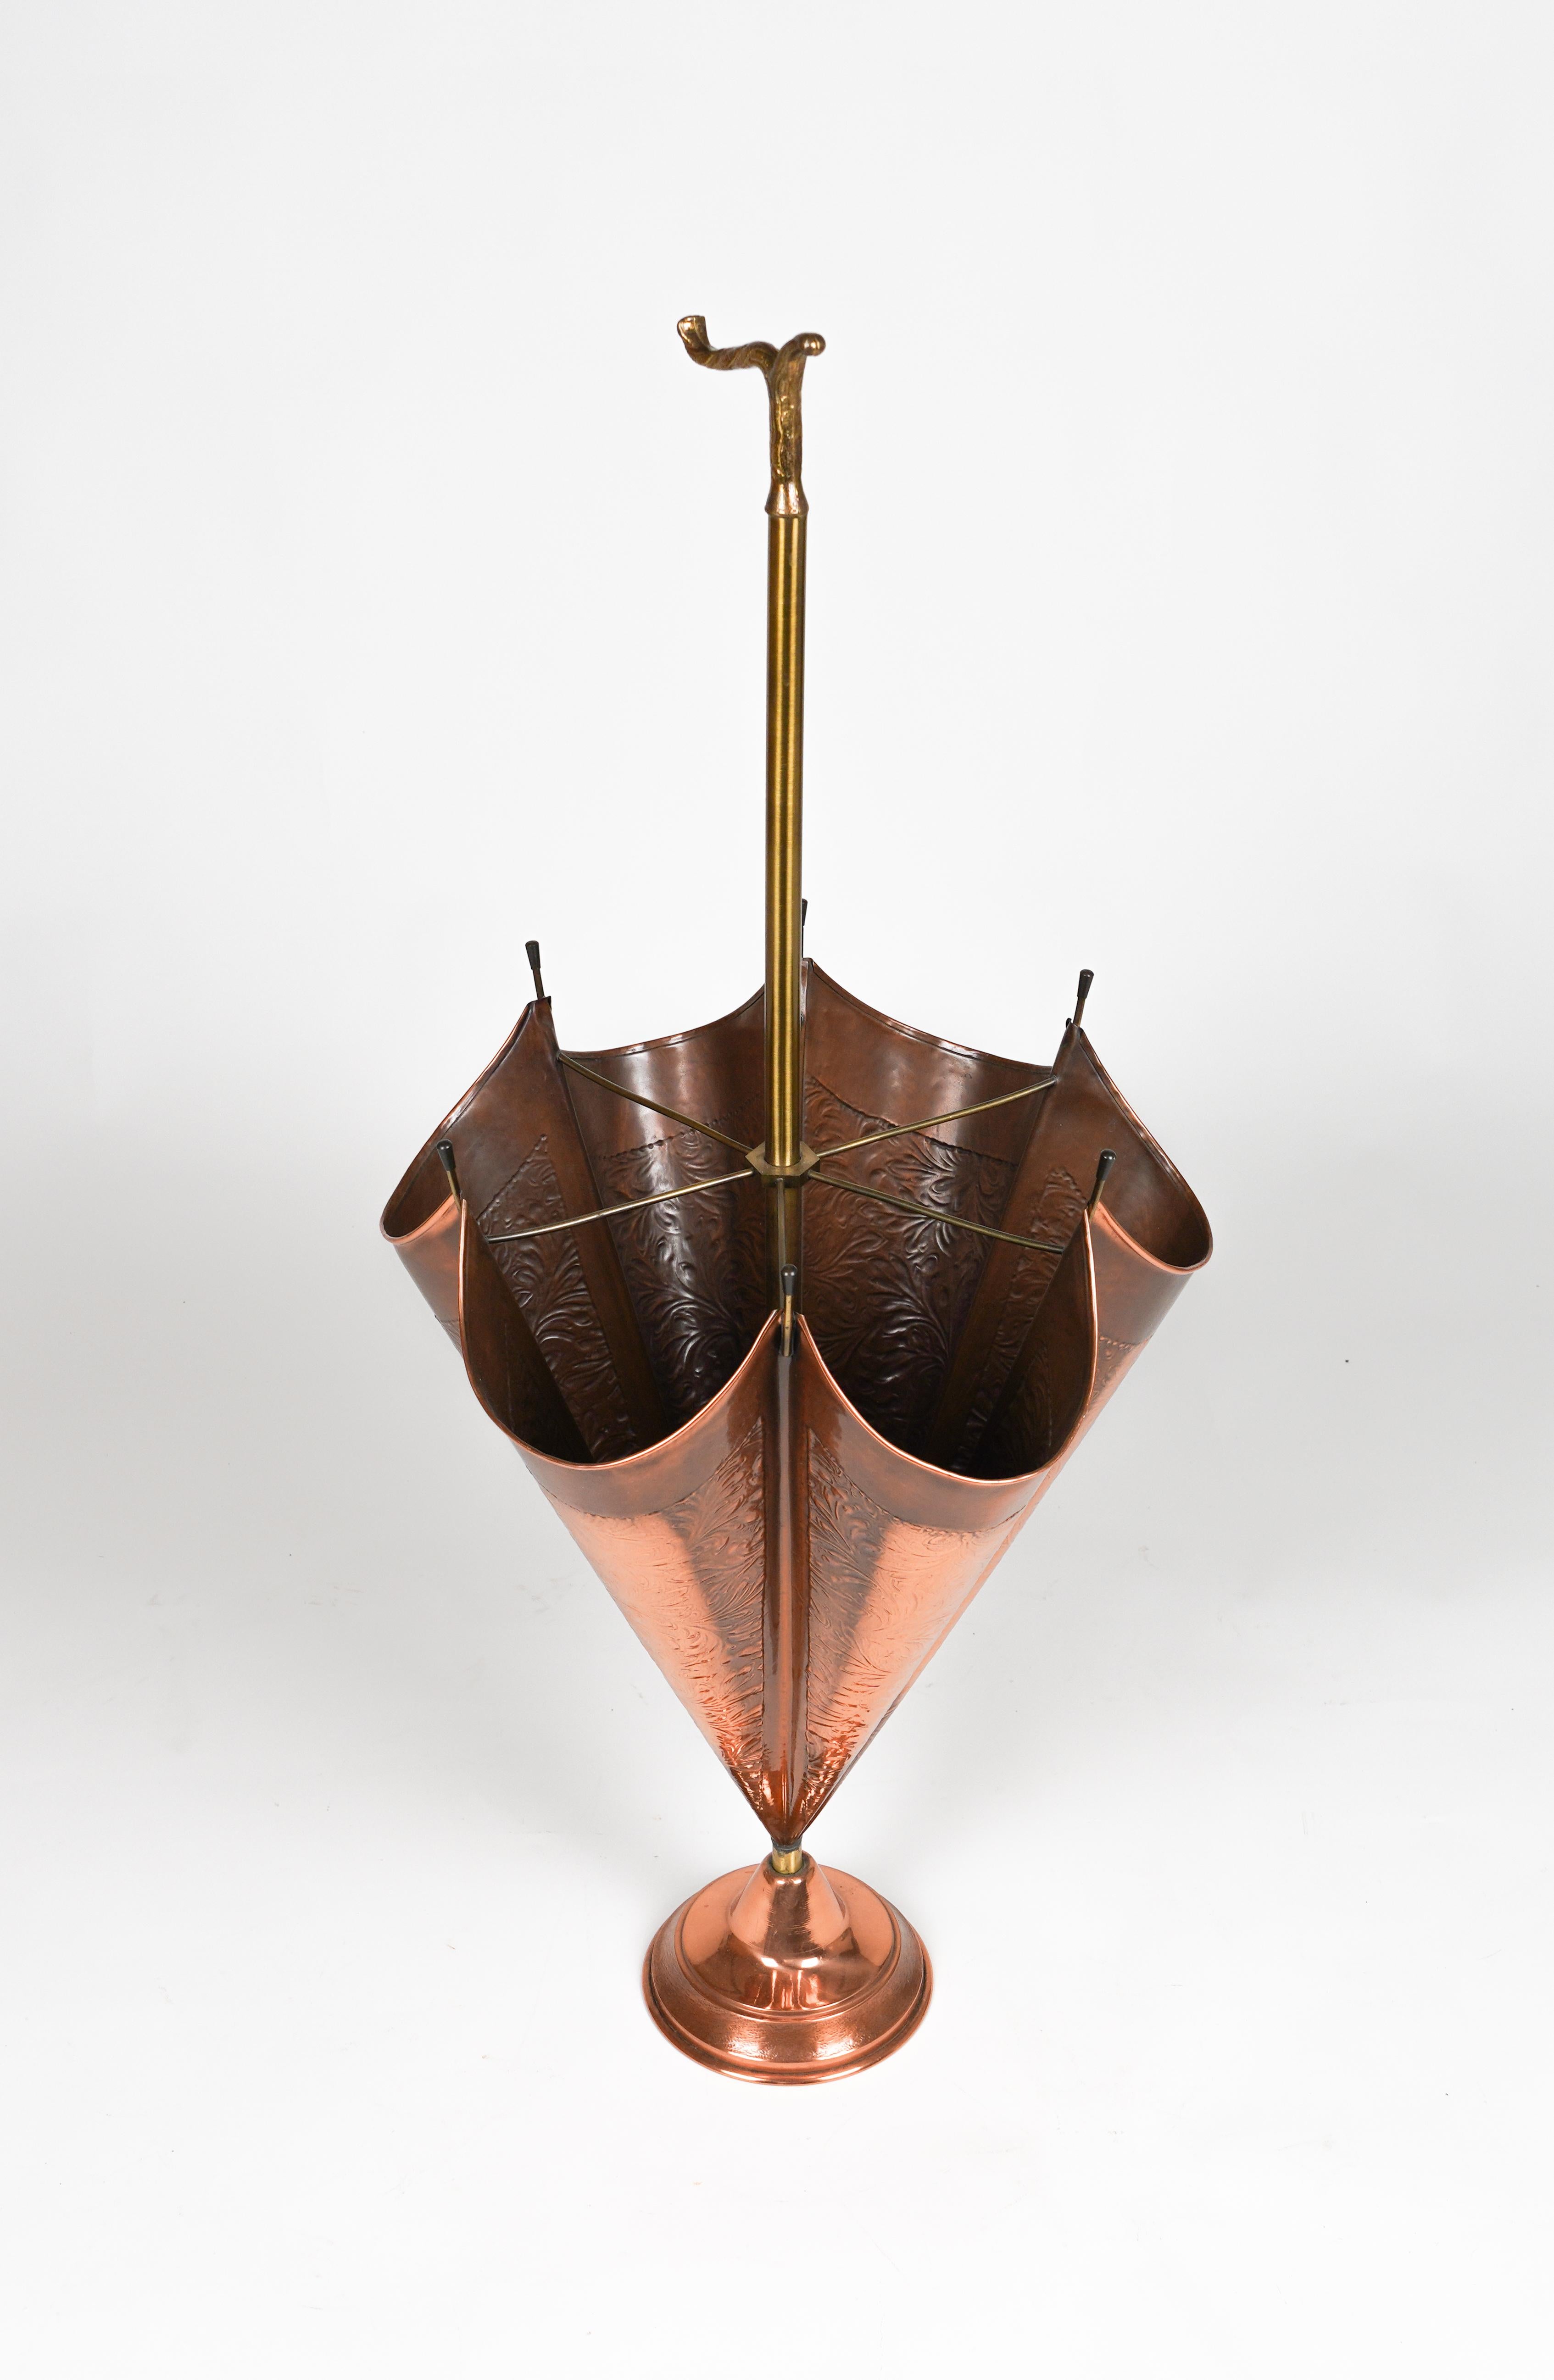 Metal Midcentury Umbrella Stand in Copper and Brass, Italy 1970s For Sale